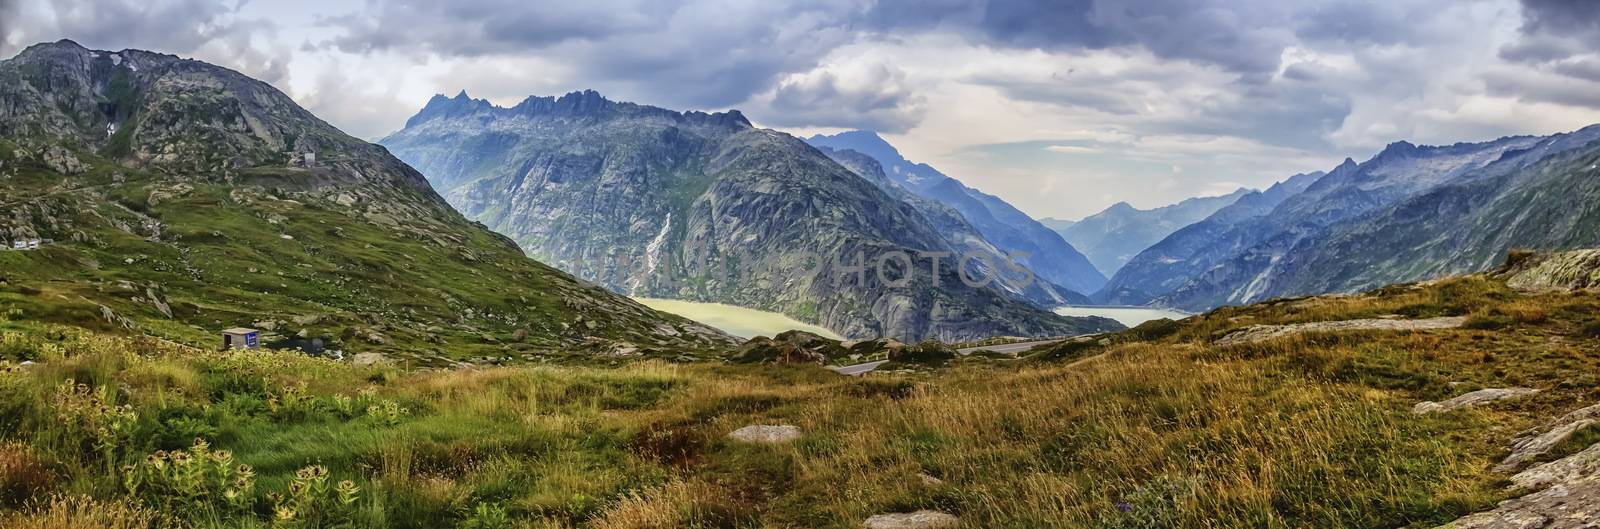 View on Hasli valley from Grimselpass by cloudy day, Bern canton, Switzerland